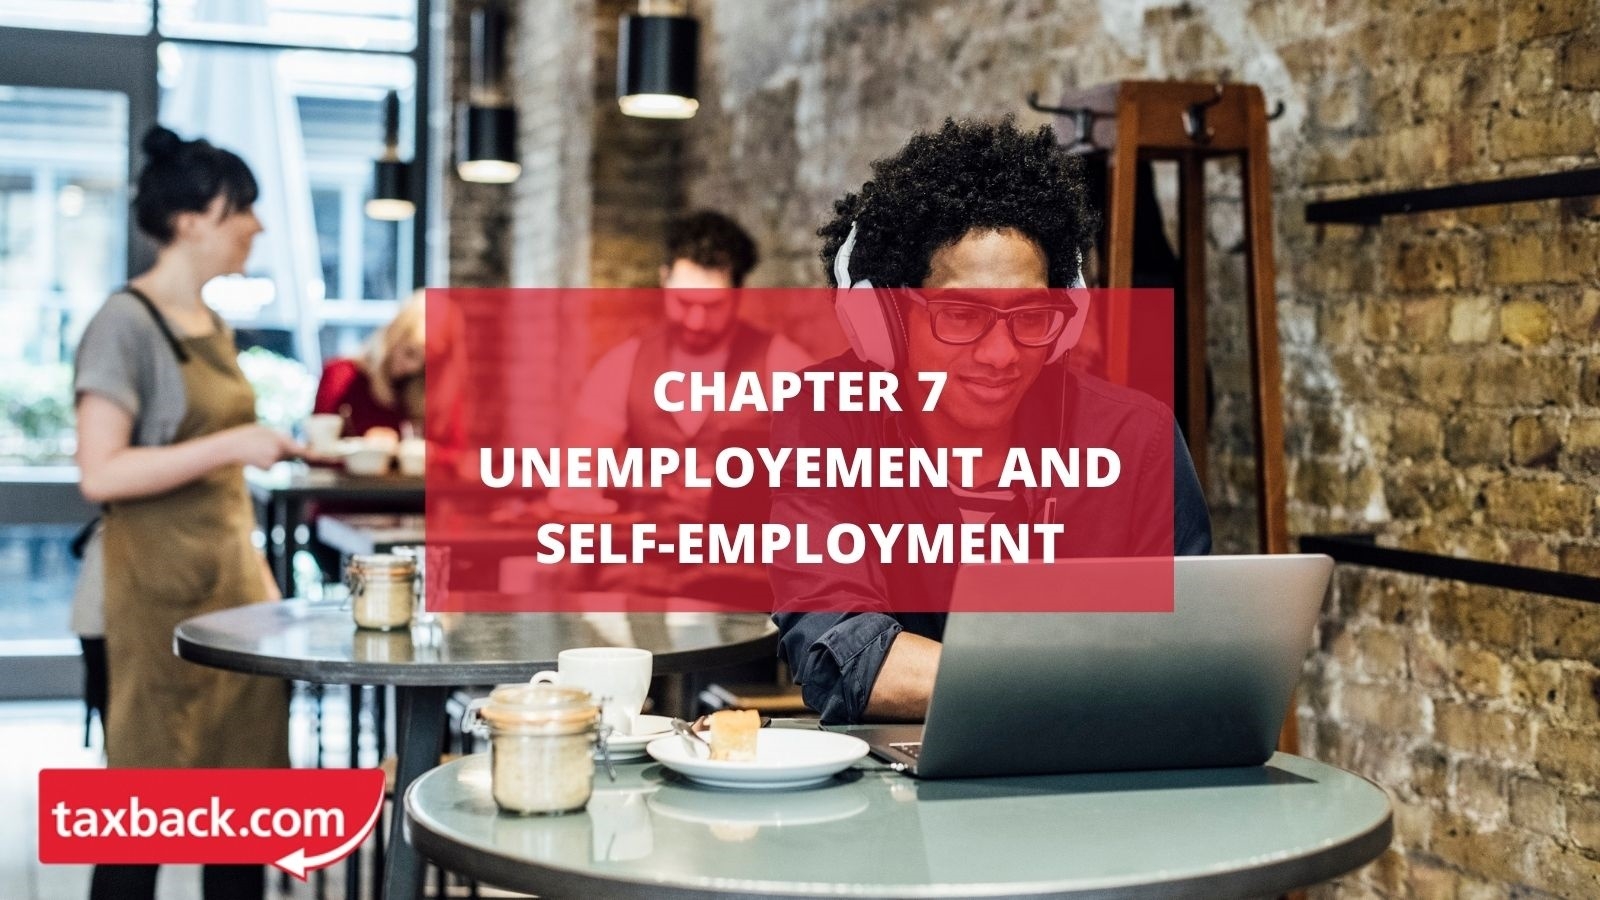 Chapter 7 - Unemployment and Self-Employment